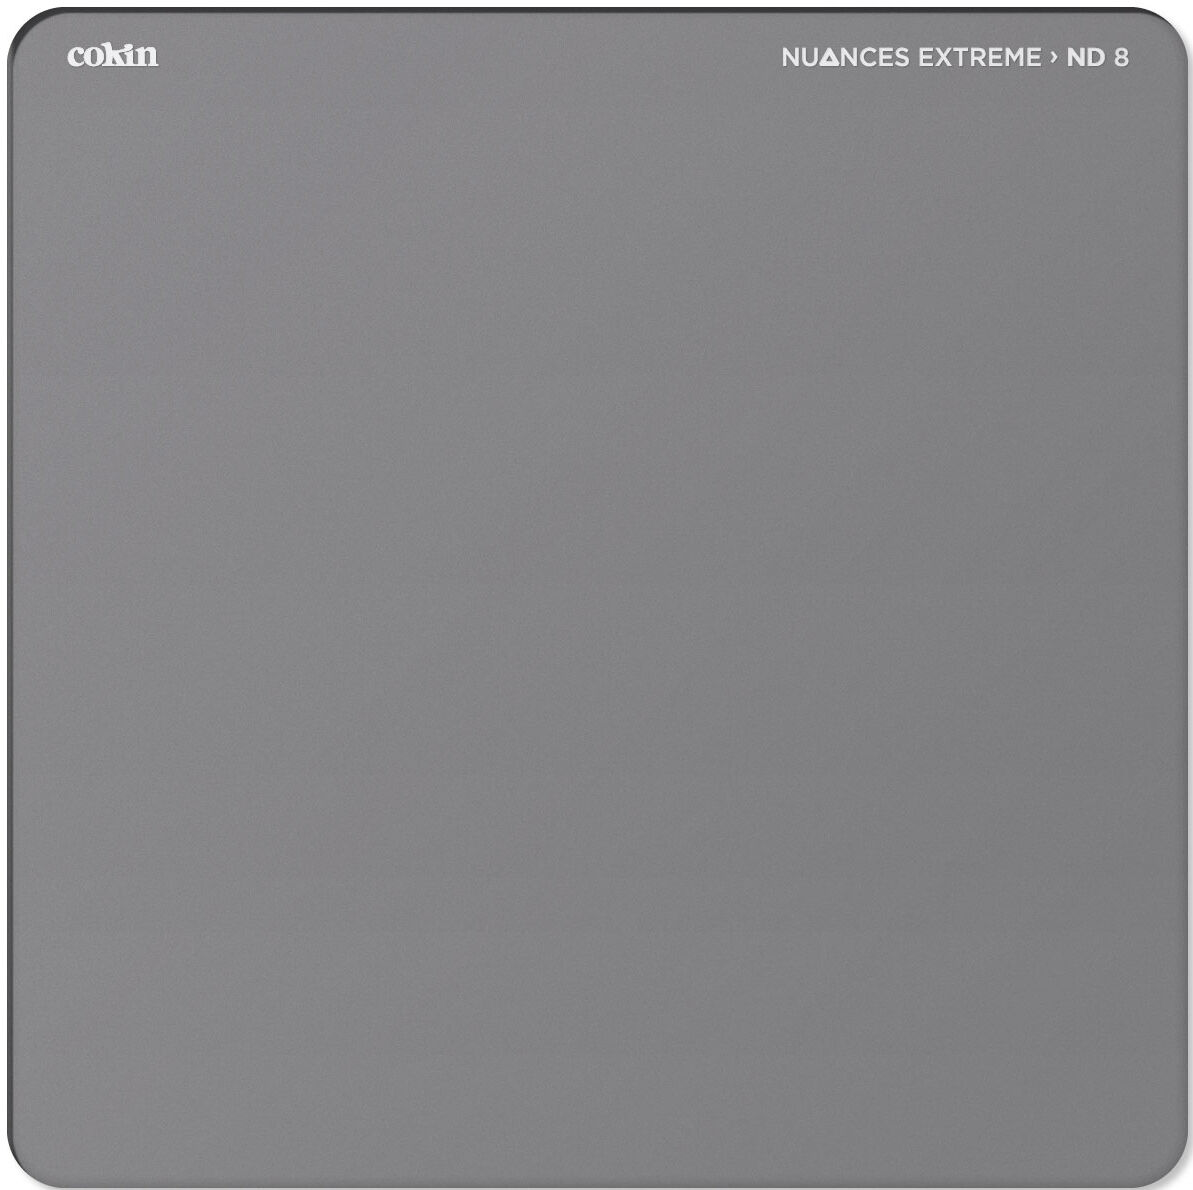 Cokin Filtro Nuances Extreme Densidade Neutra ND8 (S�rie X-Pro)